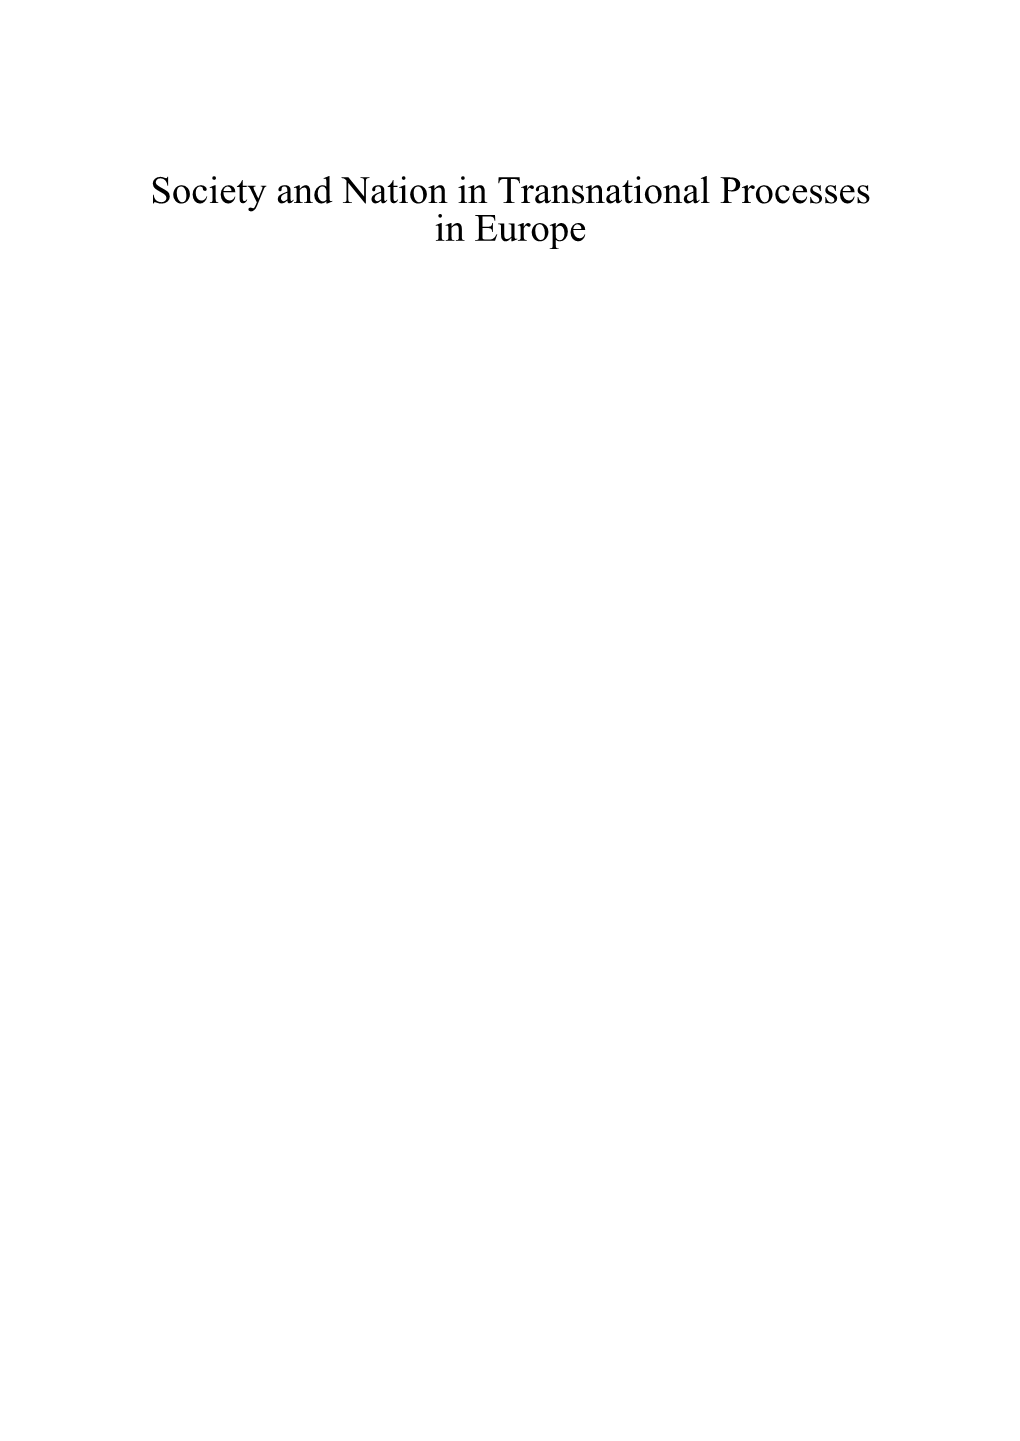 Society and Nation in Transnational Processes in Europe CGS Studies